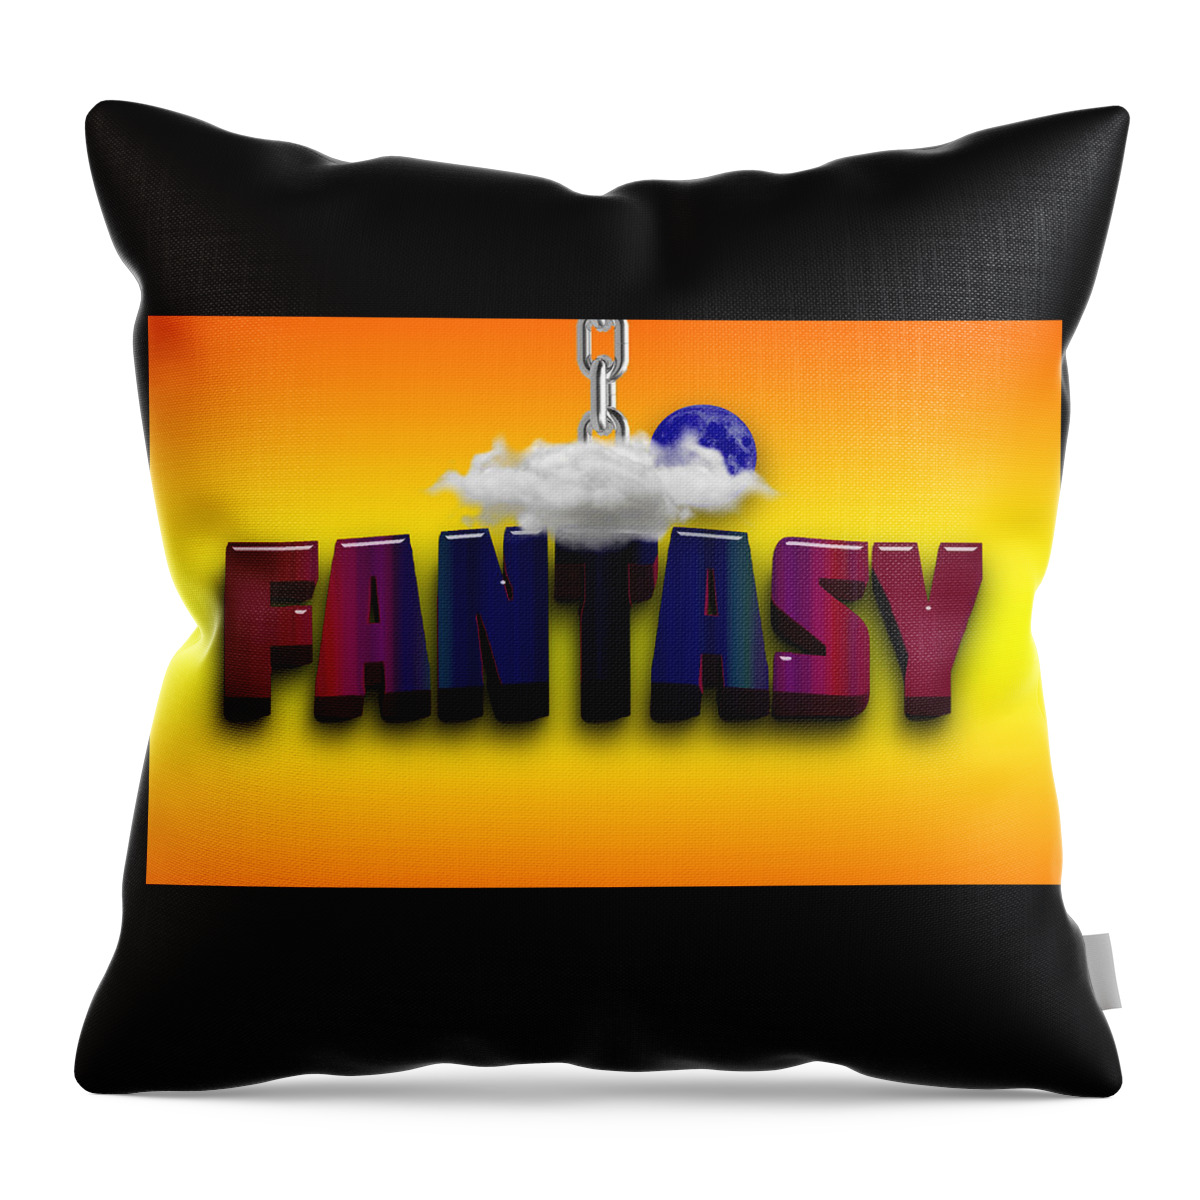 Fantasy Throw Pillow featuring the mixed media Fantasy by Marvin Blaine